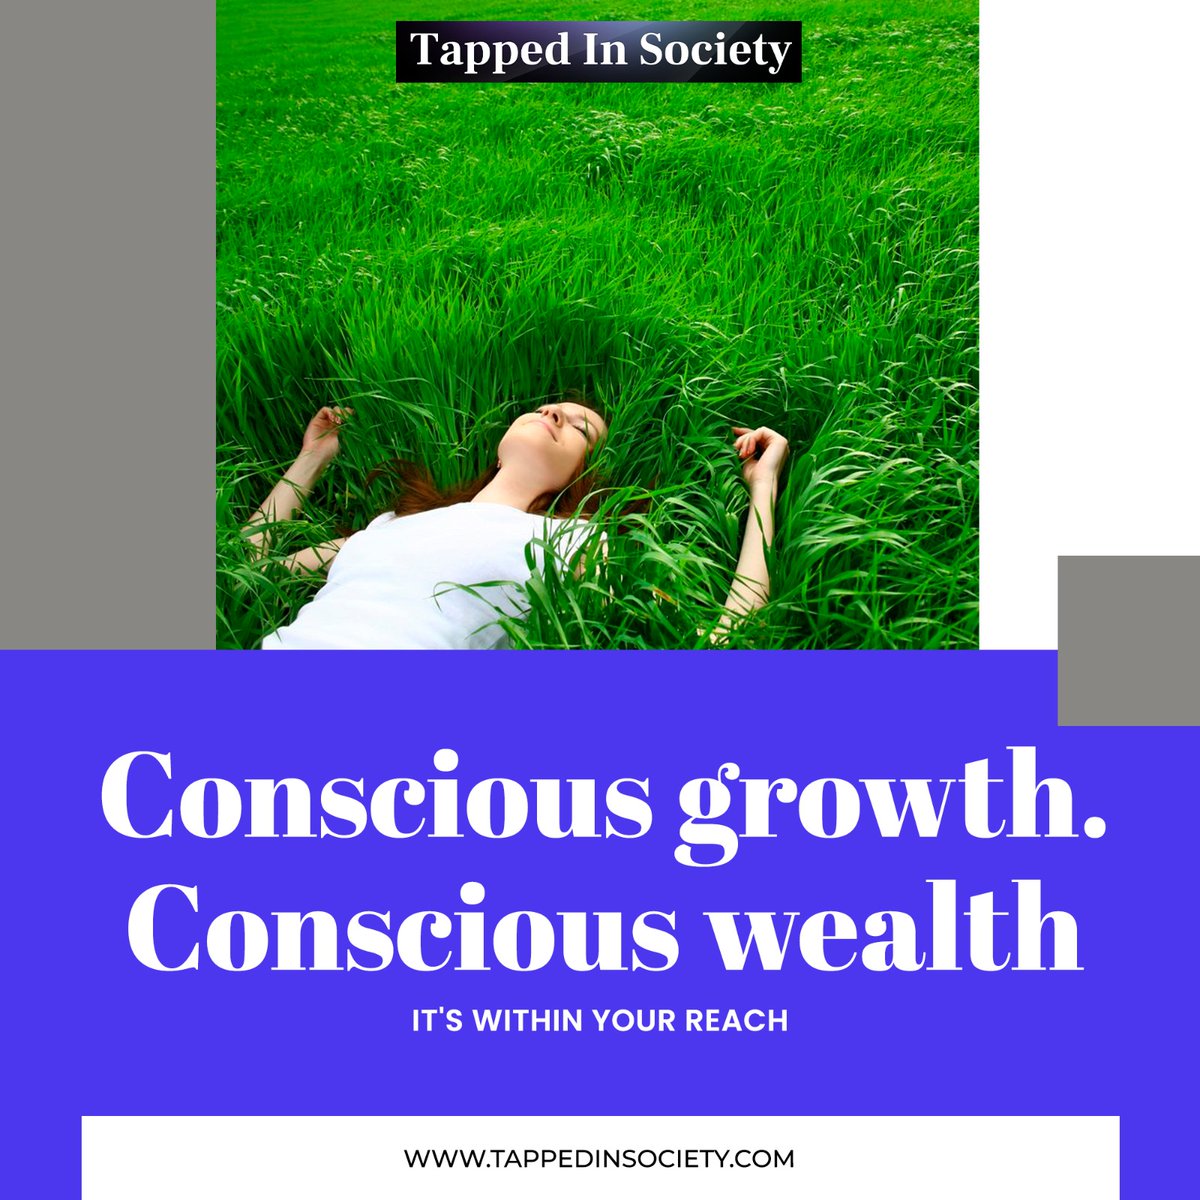 🌱 Ready to take your personal growth
to the next level? 🌟 With conscious growth, anything is possible! 

#consciousgrowth #personaldevelopment
#selfimprovement #growthmindset #neverstoplearning
#stepoutofyourcomfortzone #evolve #beyourbestself
#mindfulness #selfreflection